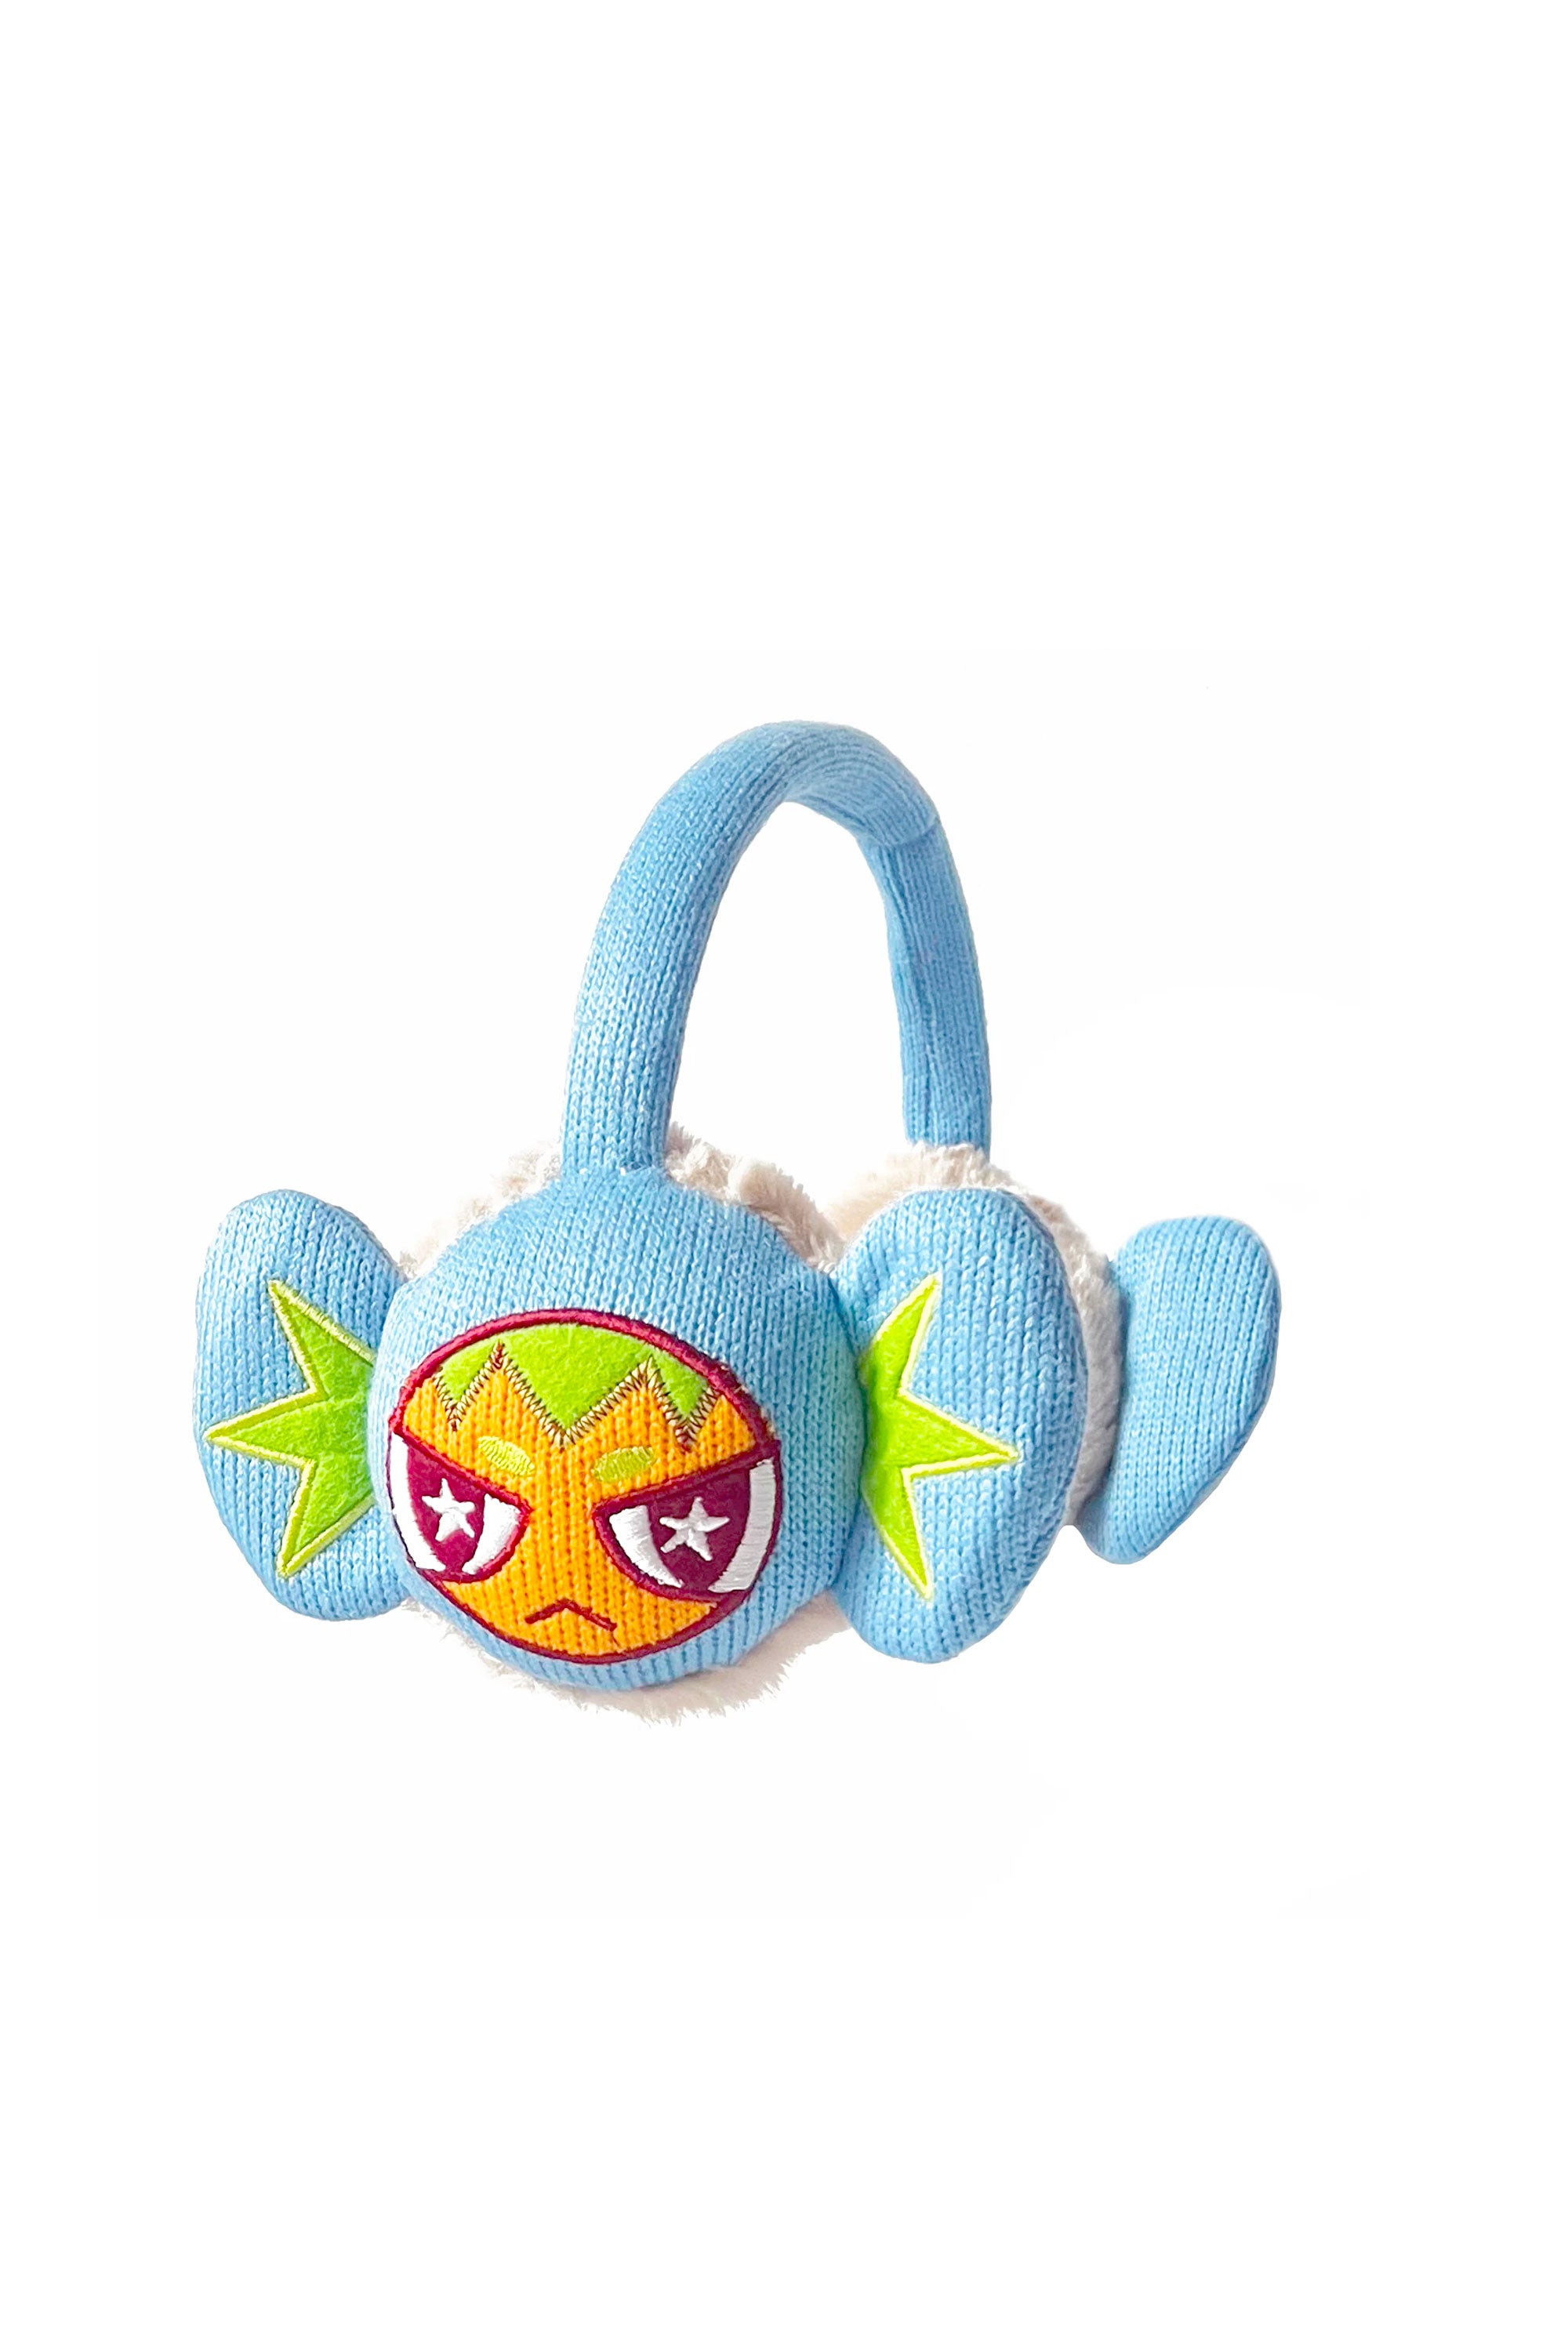 The HAPPY 99 - REM EARMUFFS BLUE available online with global shipping, and in PAM Stores Melbourne and Sydney.